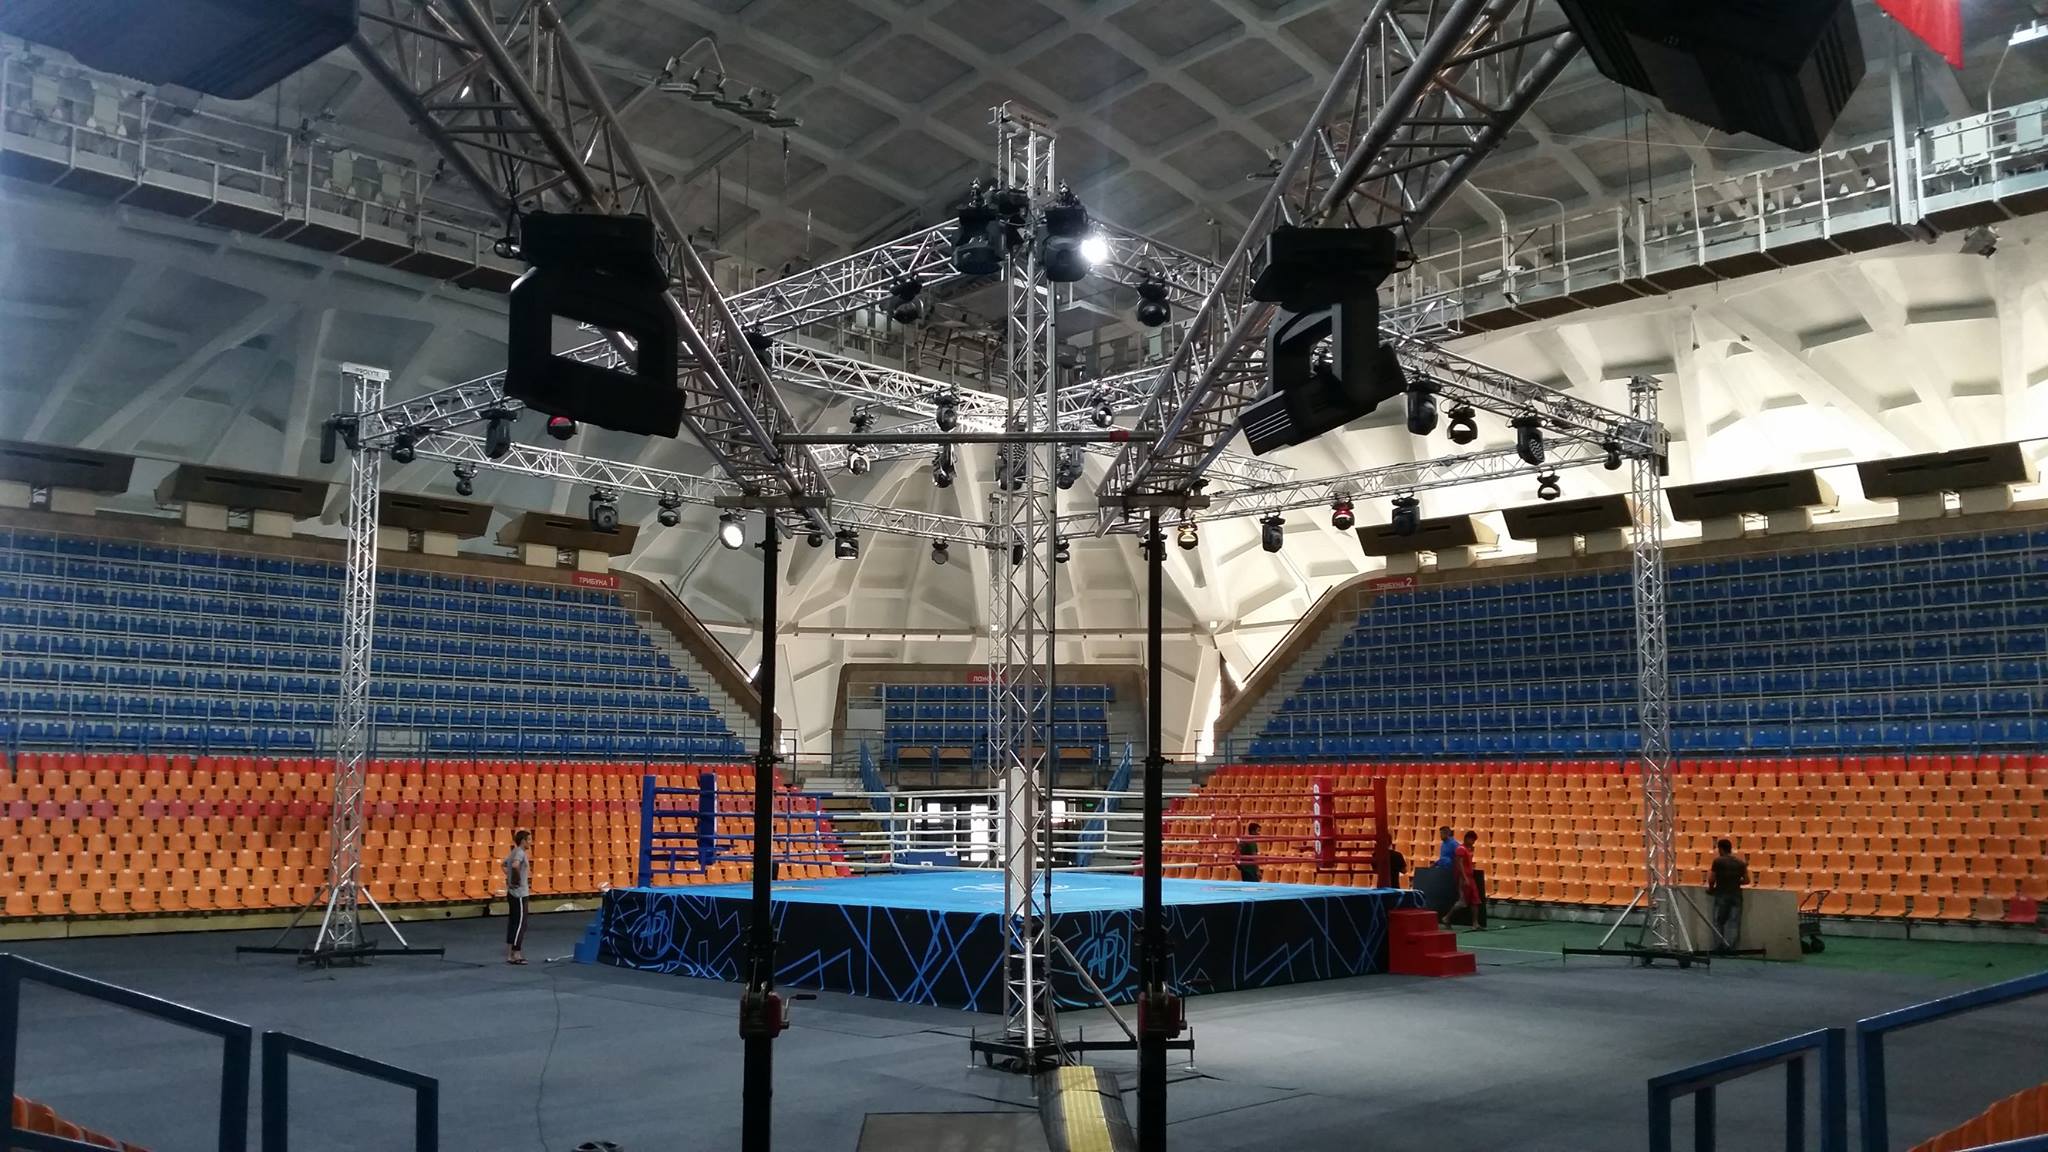 Boxing ring @ Moscow (Russia)